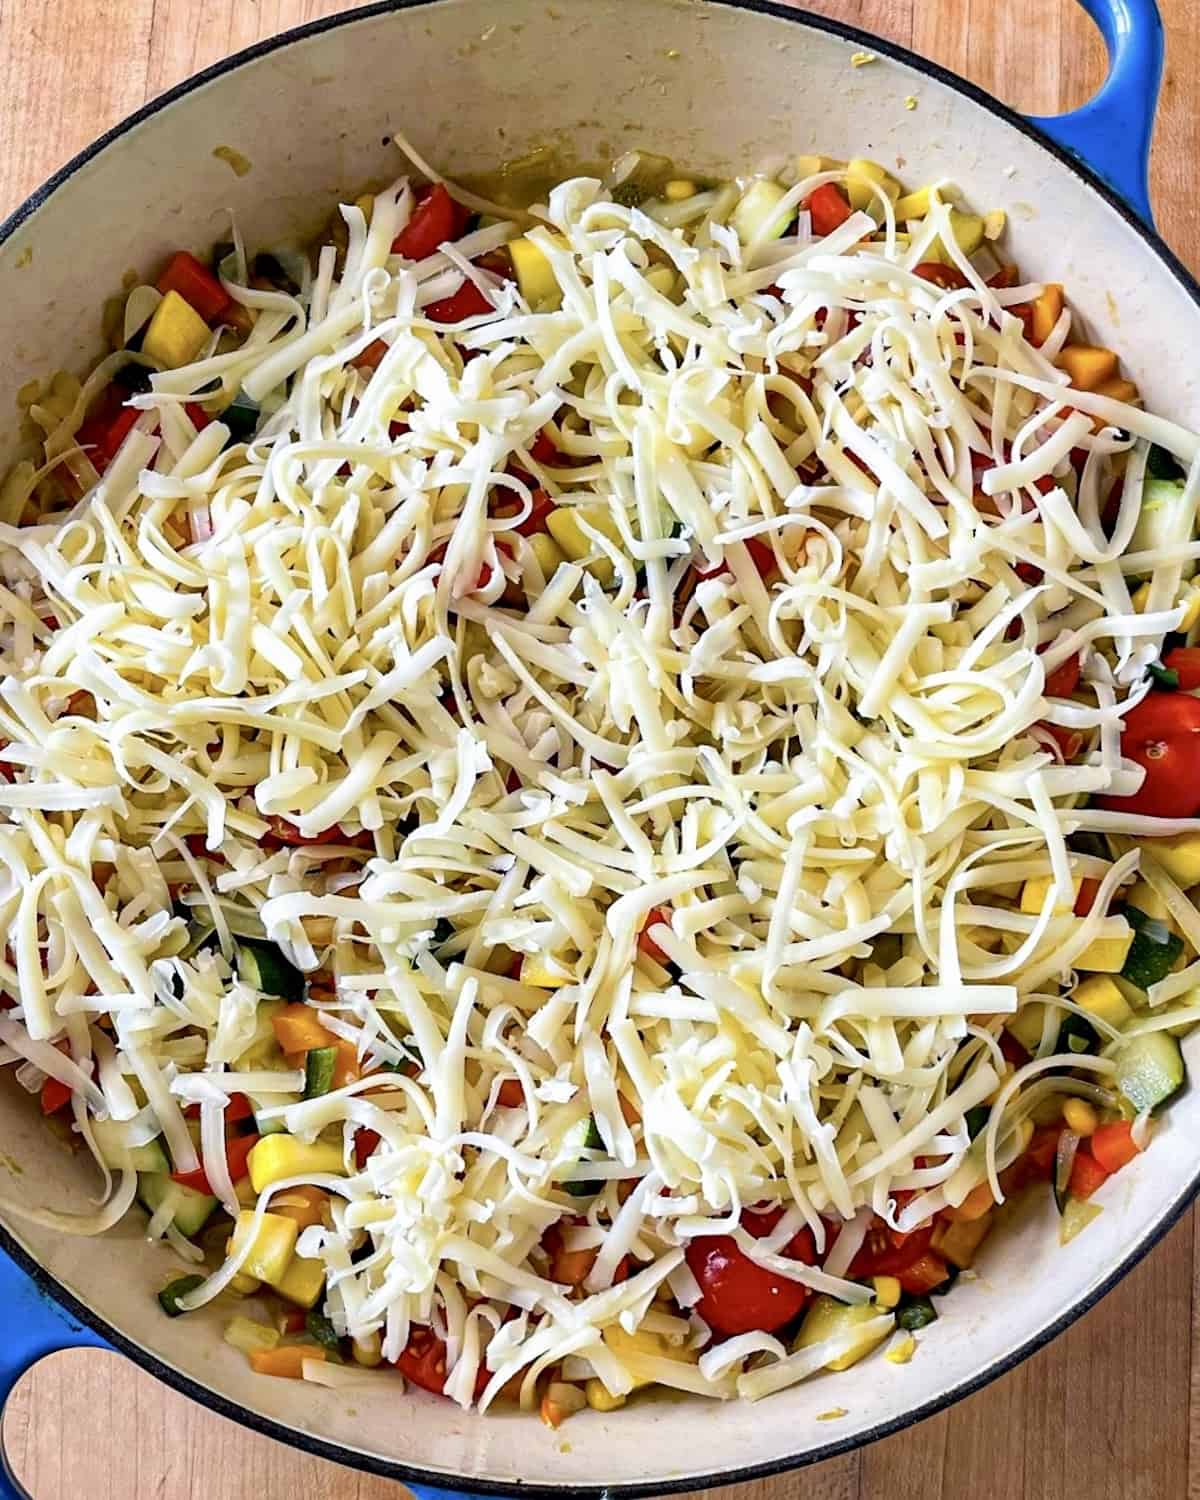 A mixture of diced onions, poblano peppers, bell peppers, zucchini, yellow squash, corn, green chiles, and cherry tomatoes that have been cooked until soft in a skillet and topped with shredded cheddar cheese/